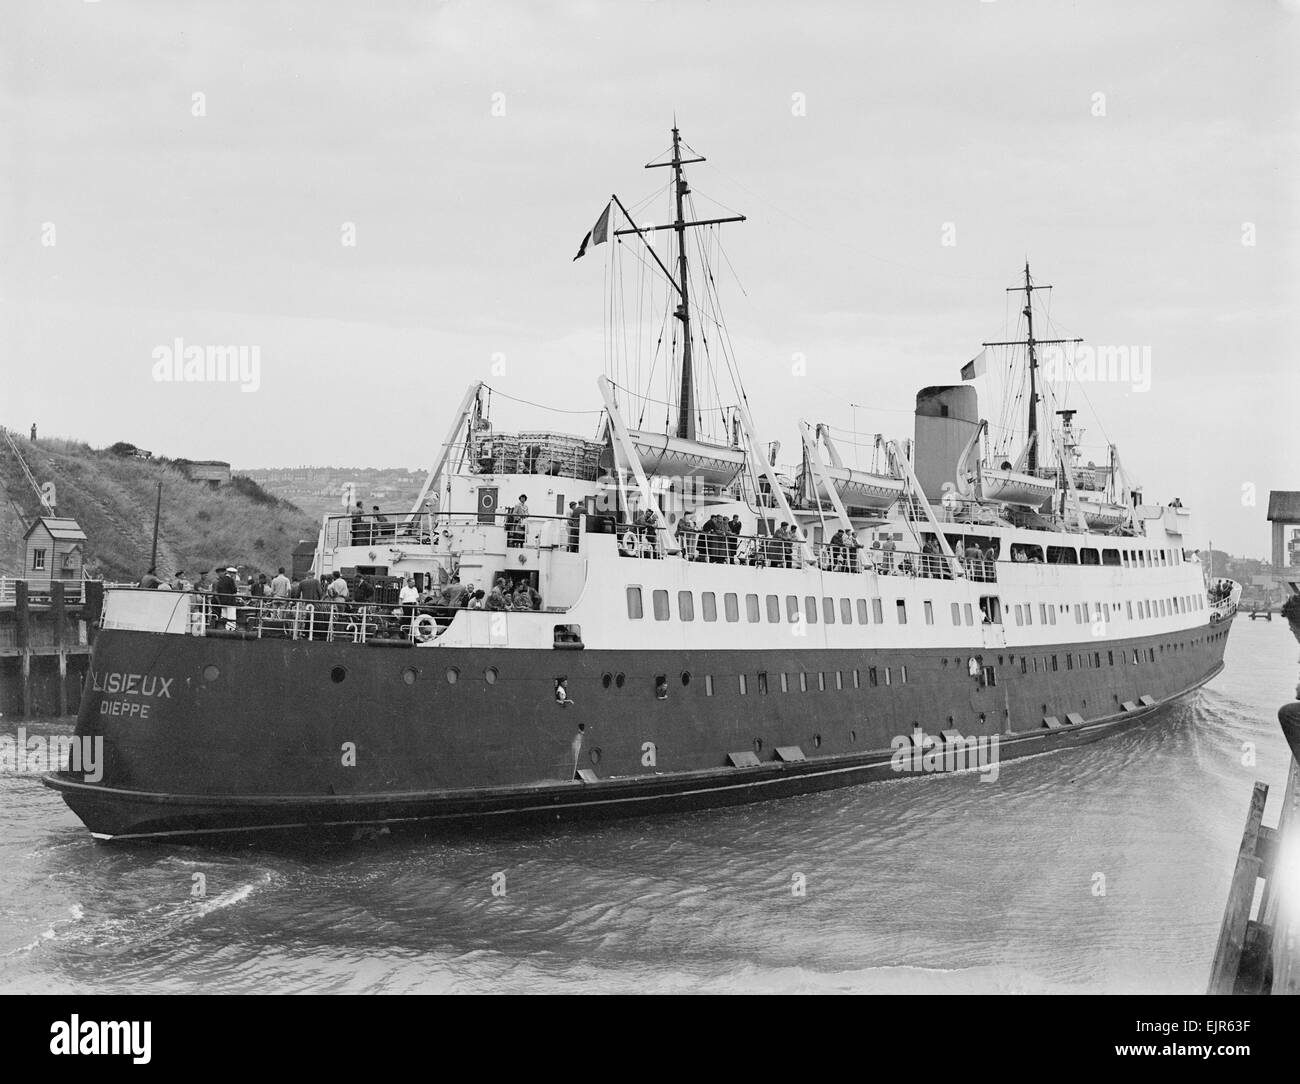 1950s Ferry High Resolution Stock Photography and Images - Alamy